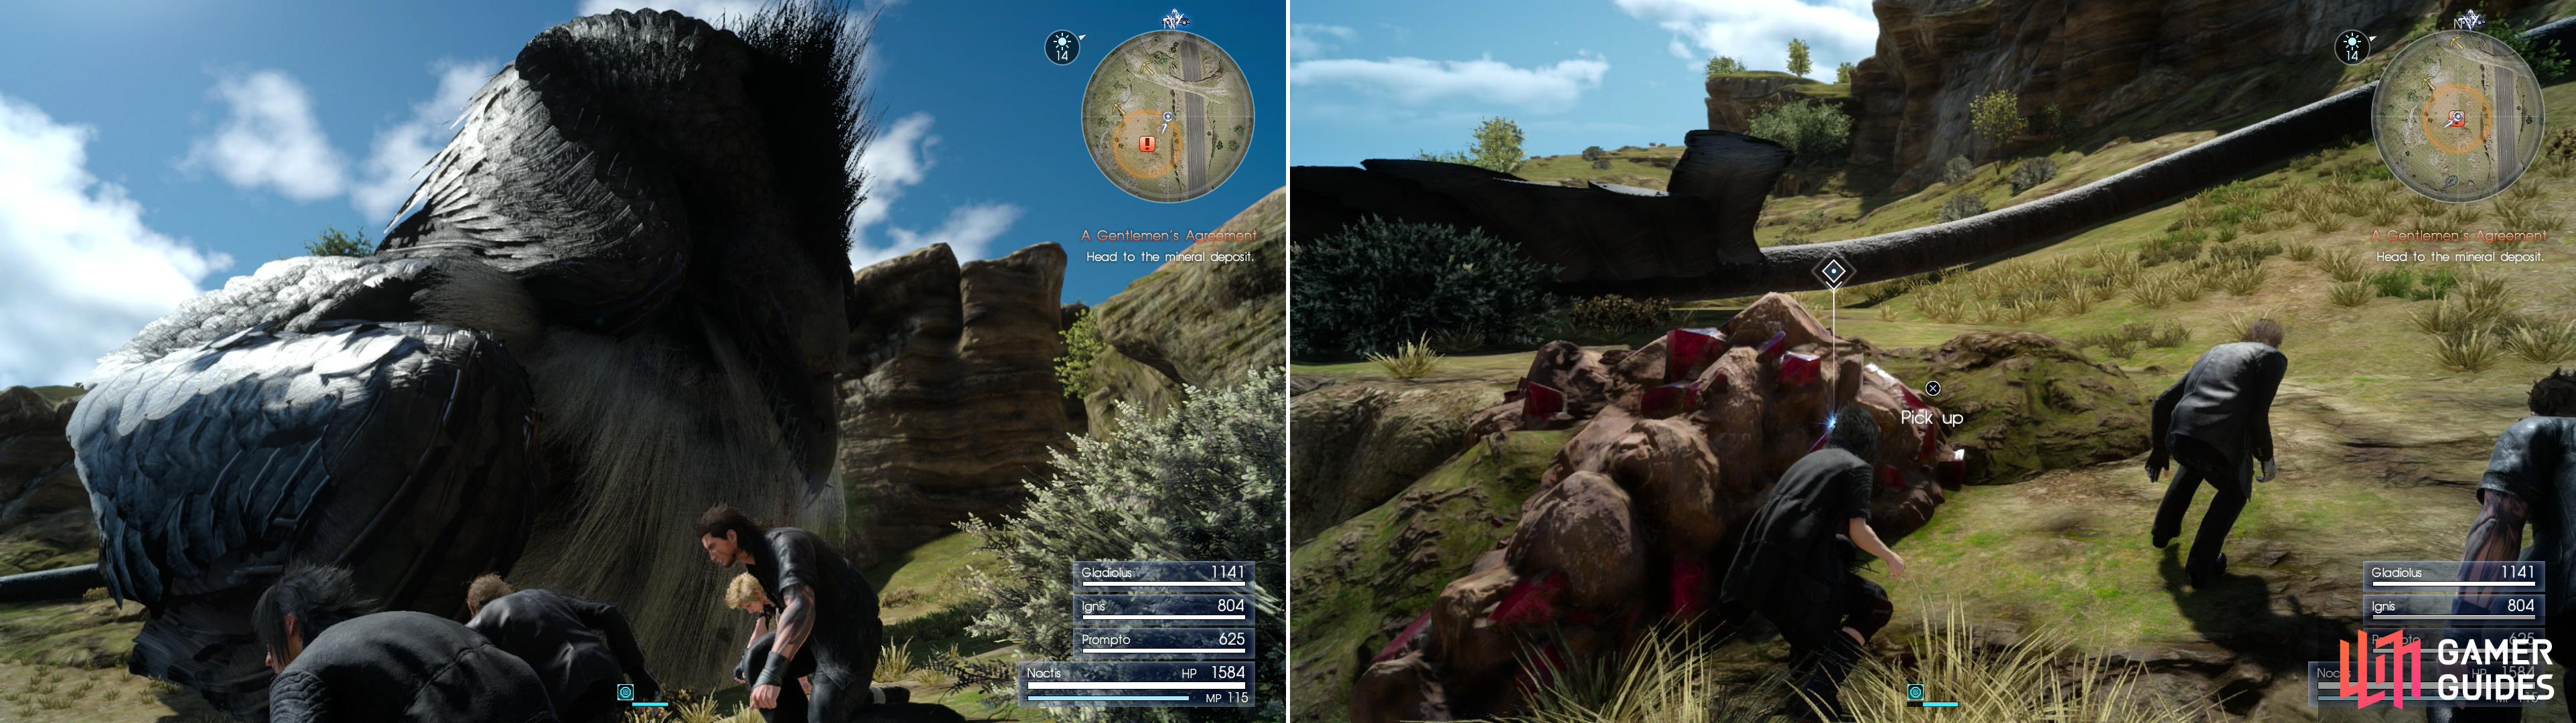 Sneak past the giant, sleeping bird with one pair too many wings (left) to reach the mineral deposit where you’ll find the stone Dino wants (right).